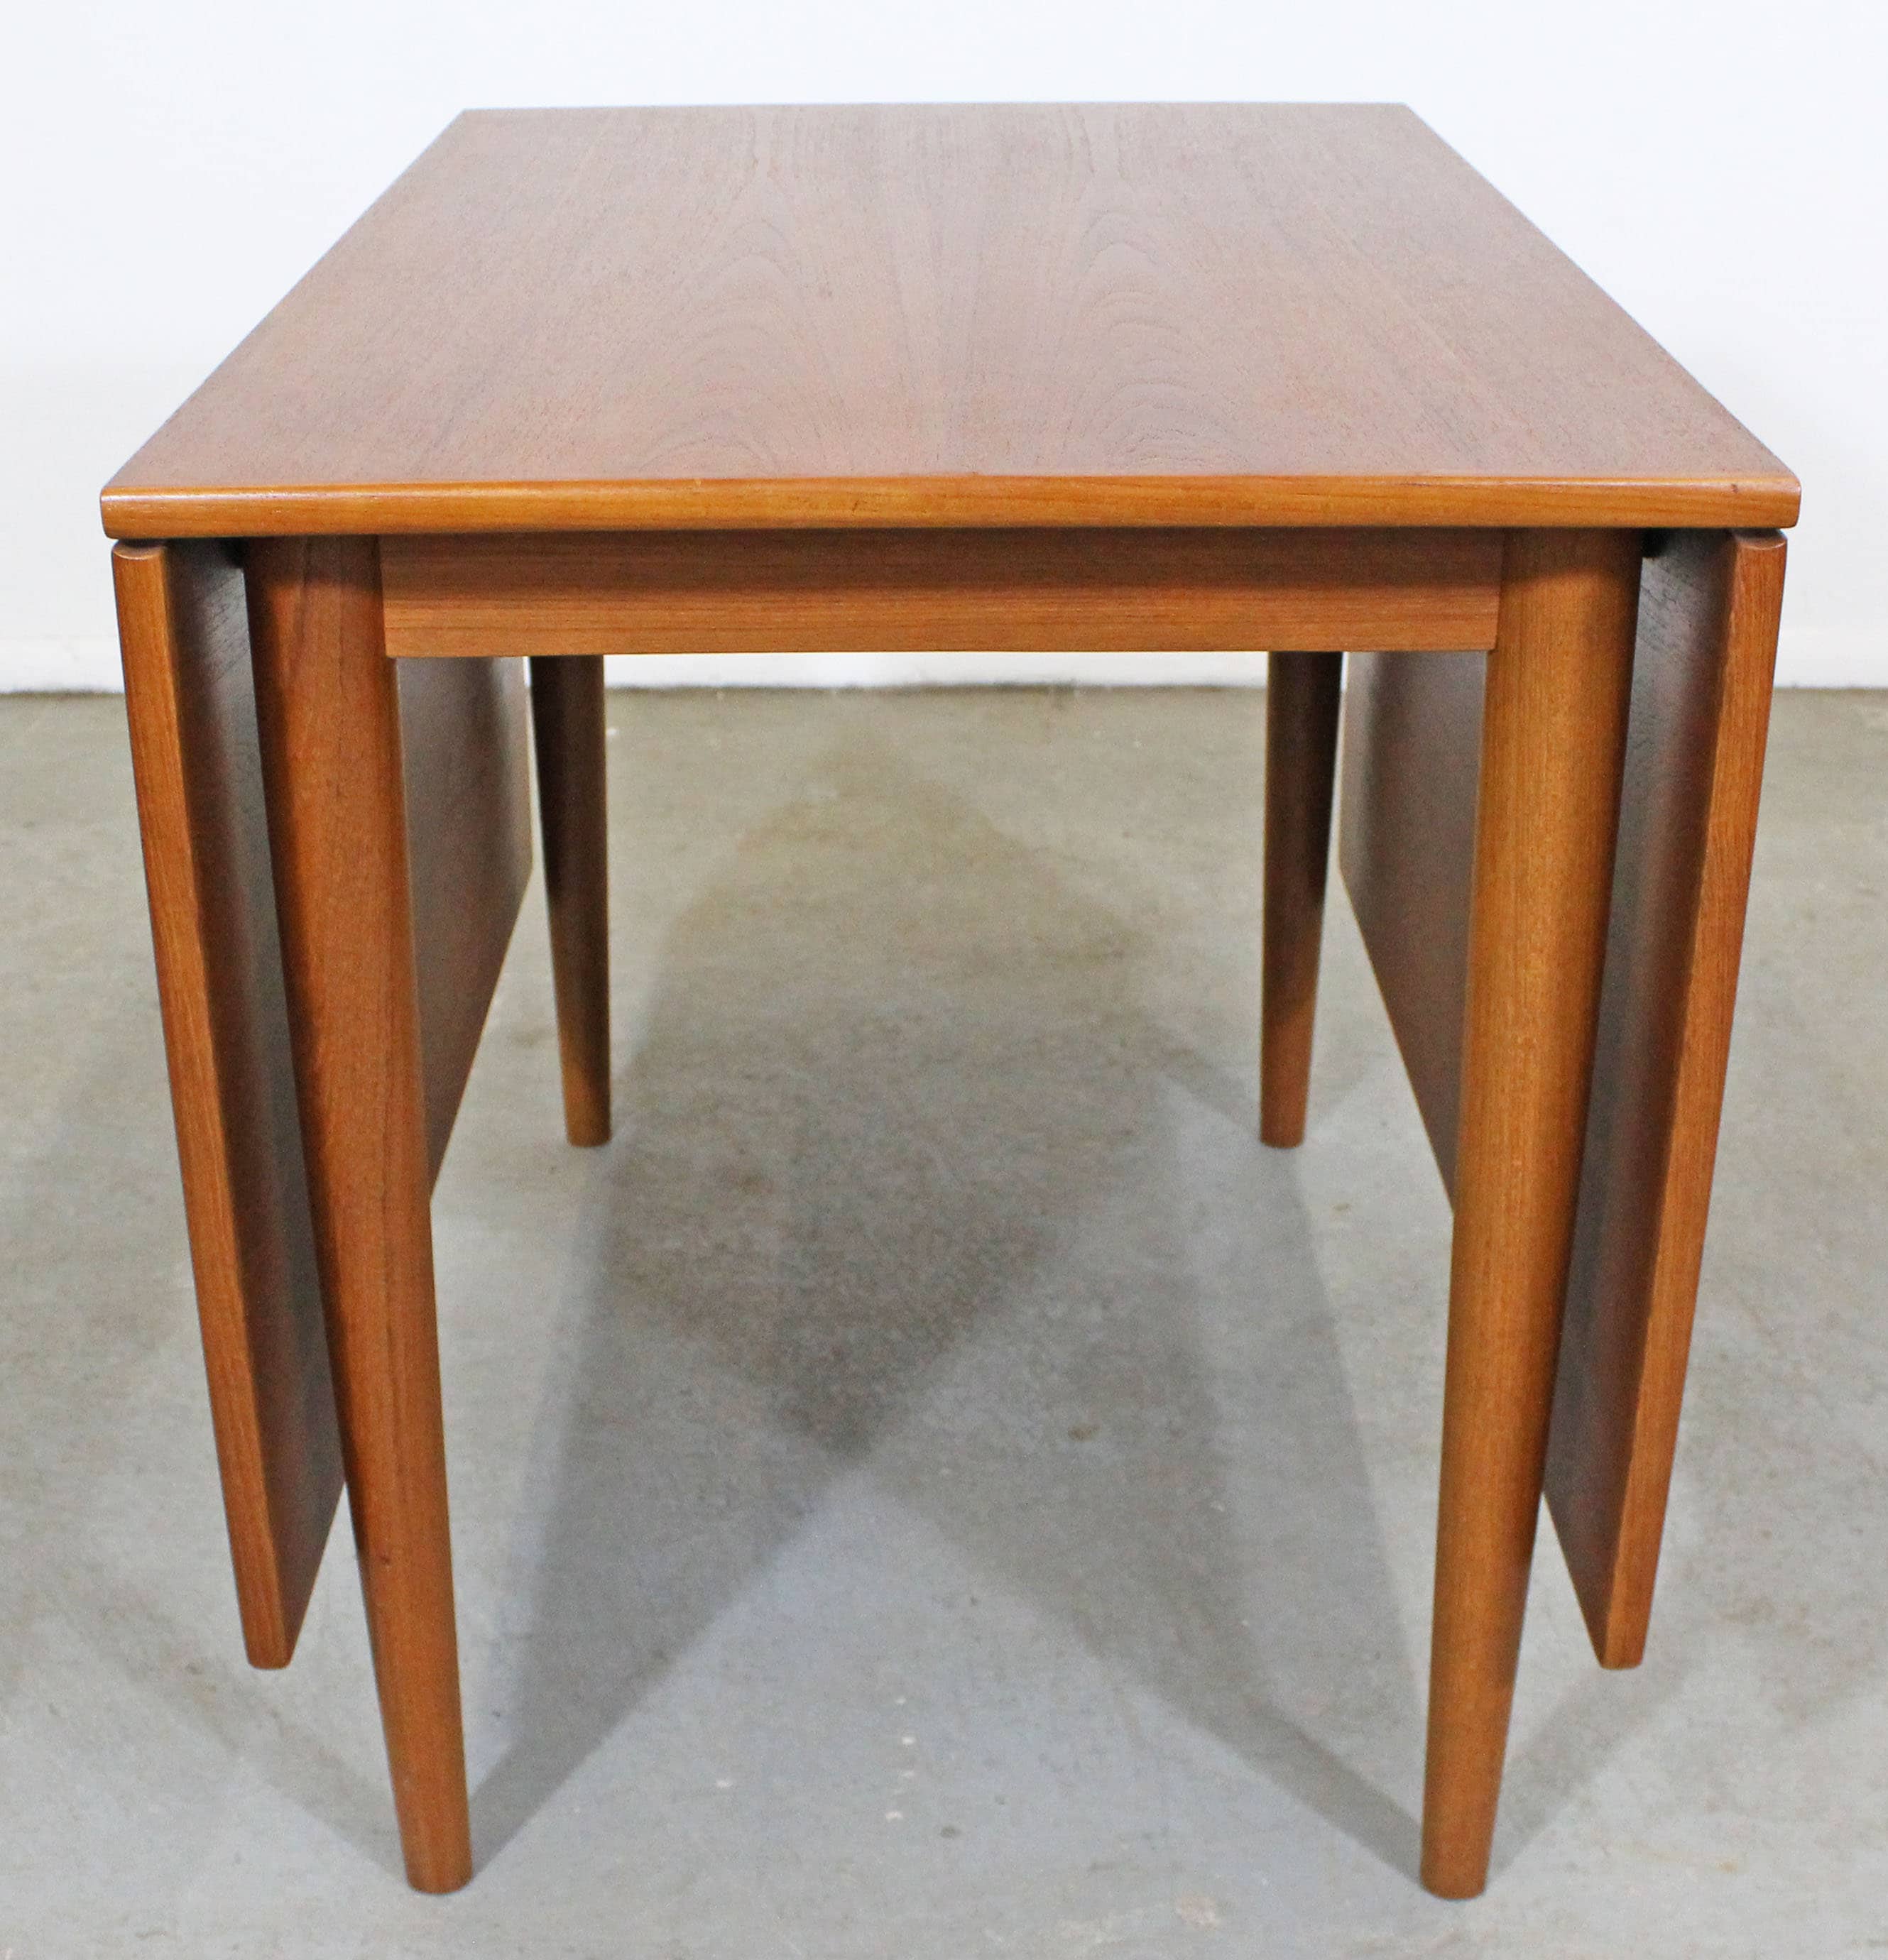 Modern Teak Dining Table: A Blend Of Style And Durability